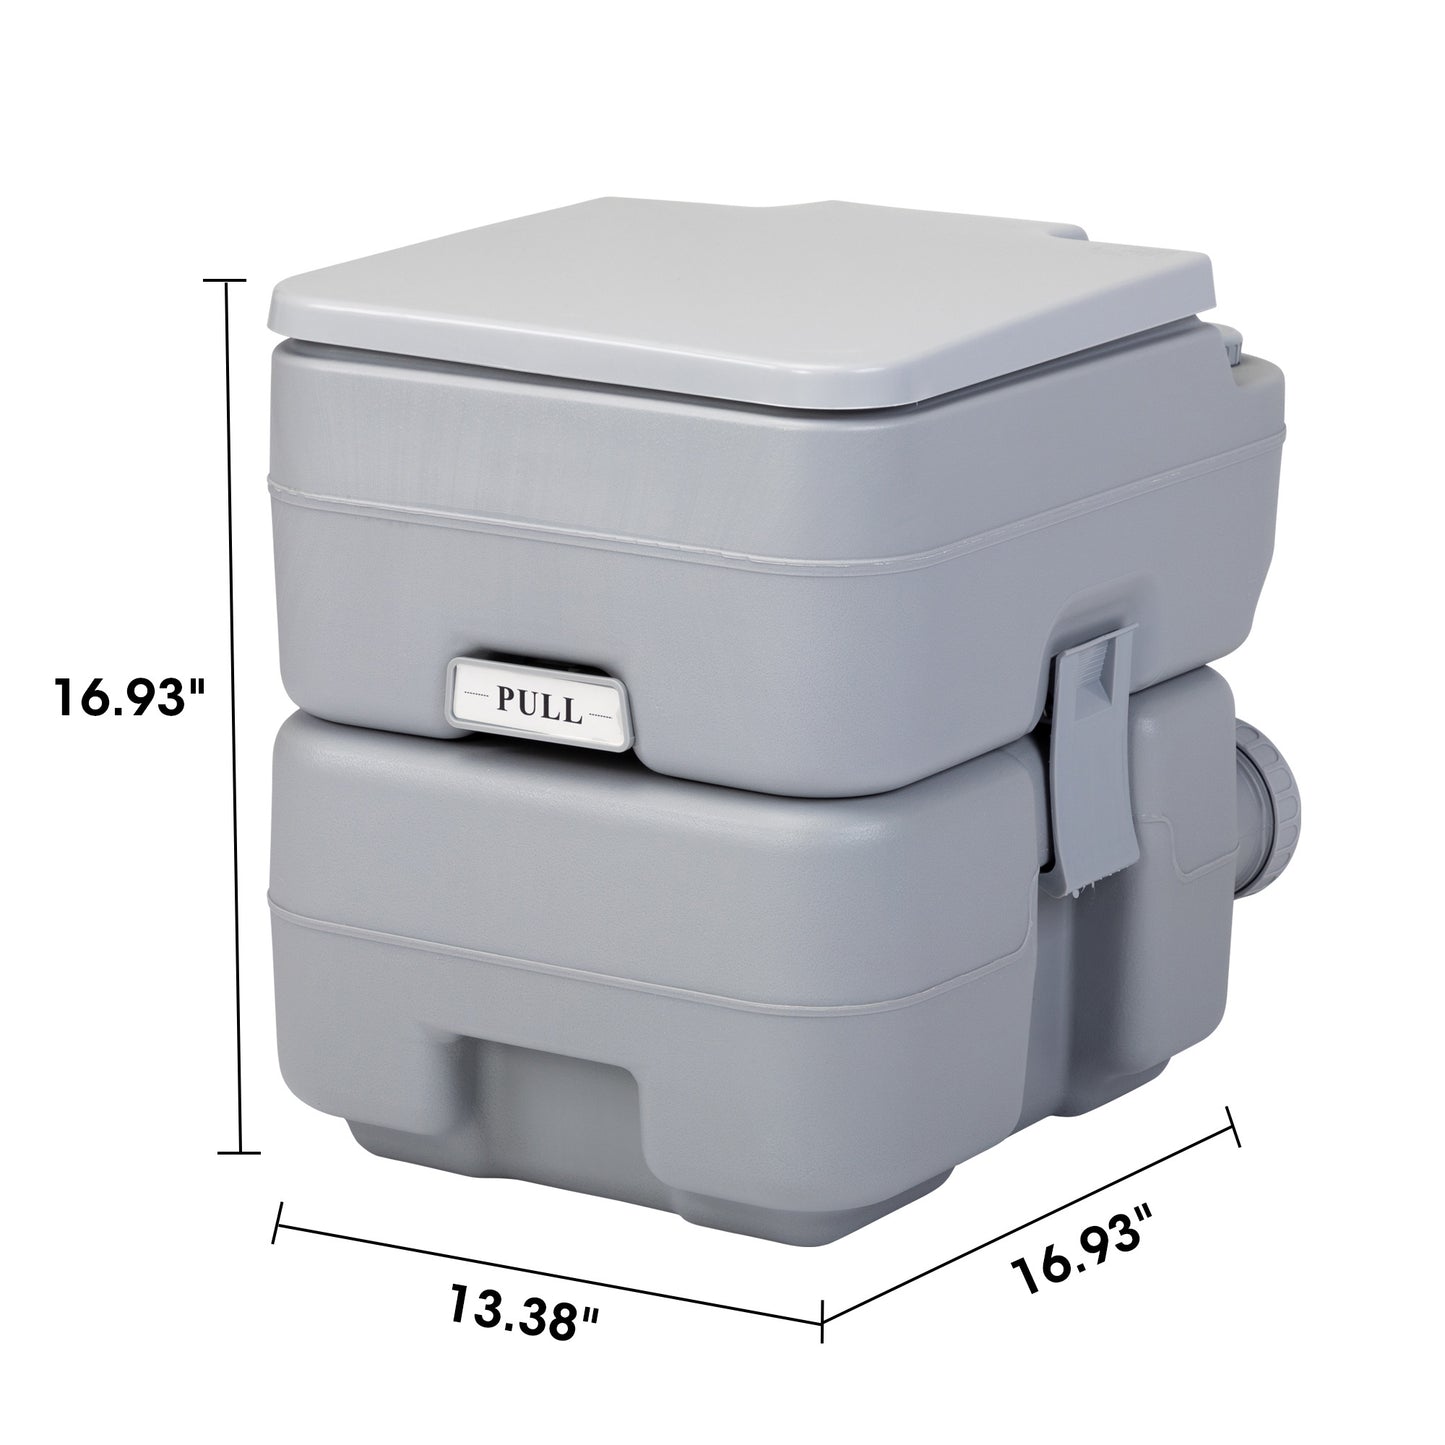 Portable Push-rod Toilet, 20L/5.3 Gallons Detachable Tank for Camping, Boating, Hiking and Traveling,